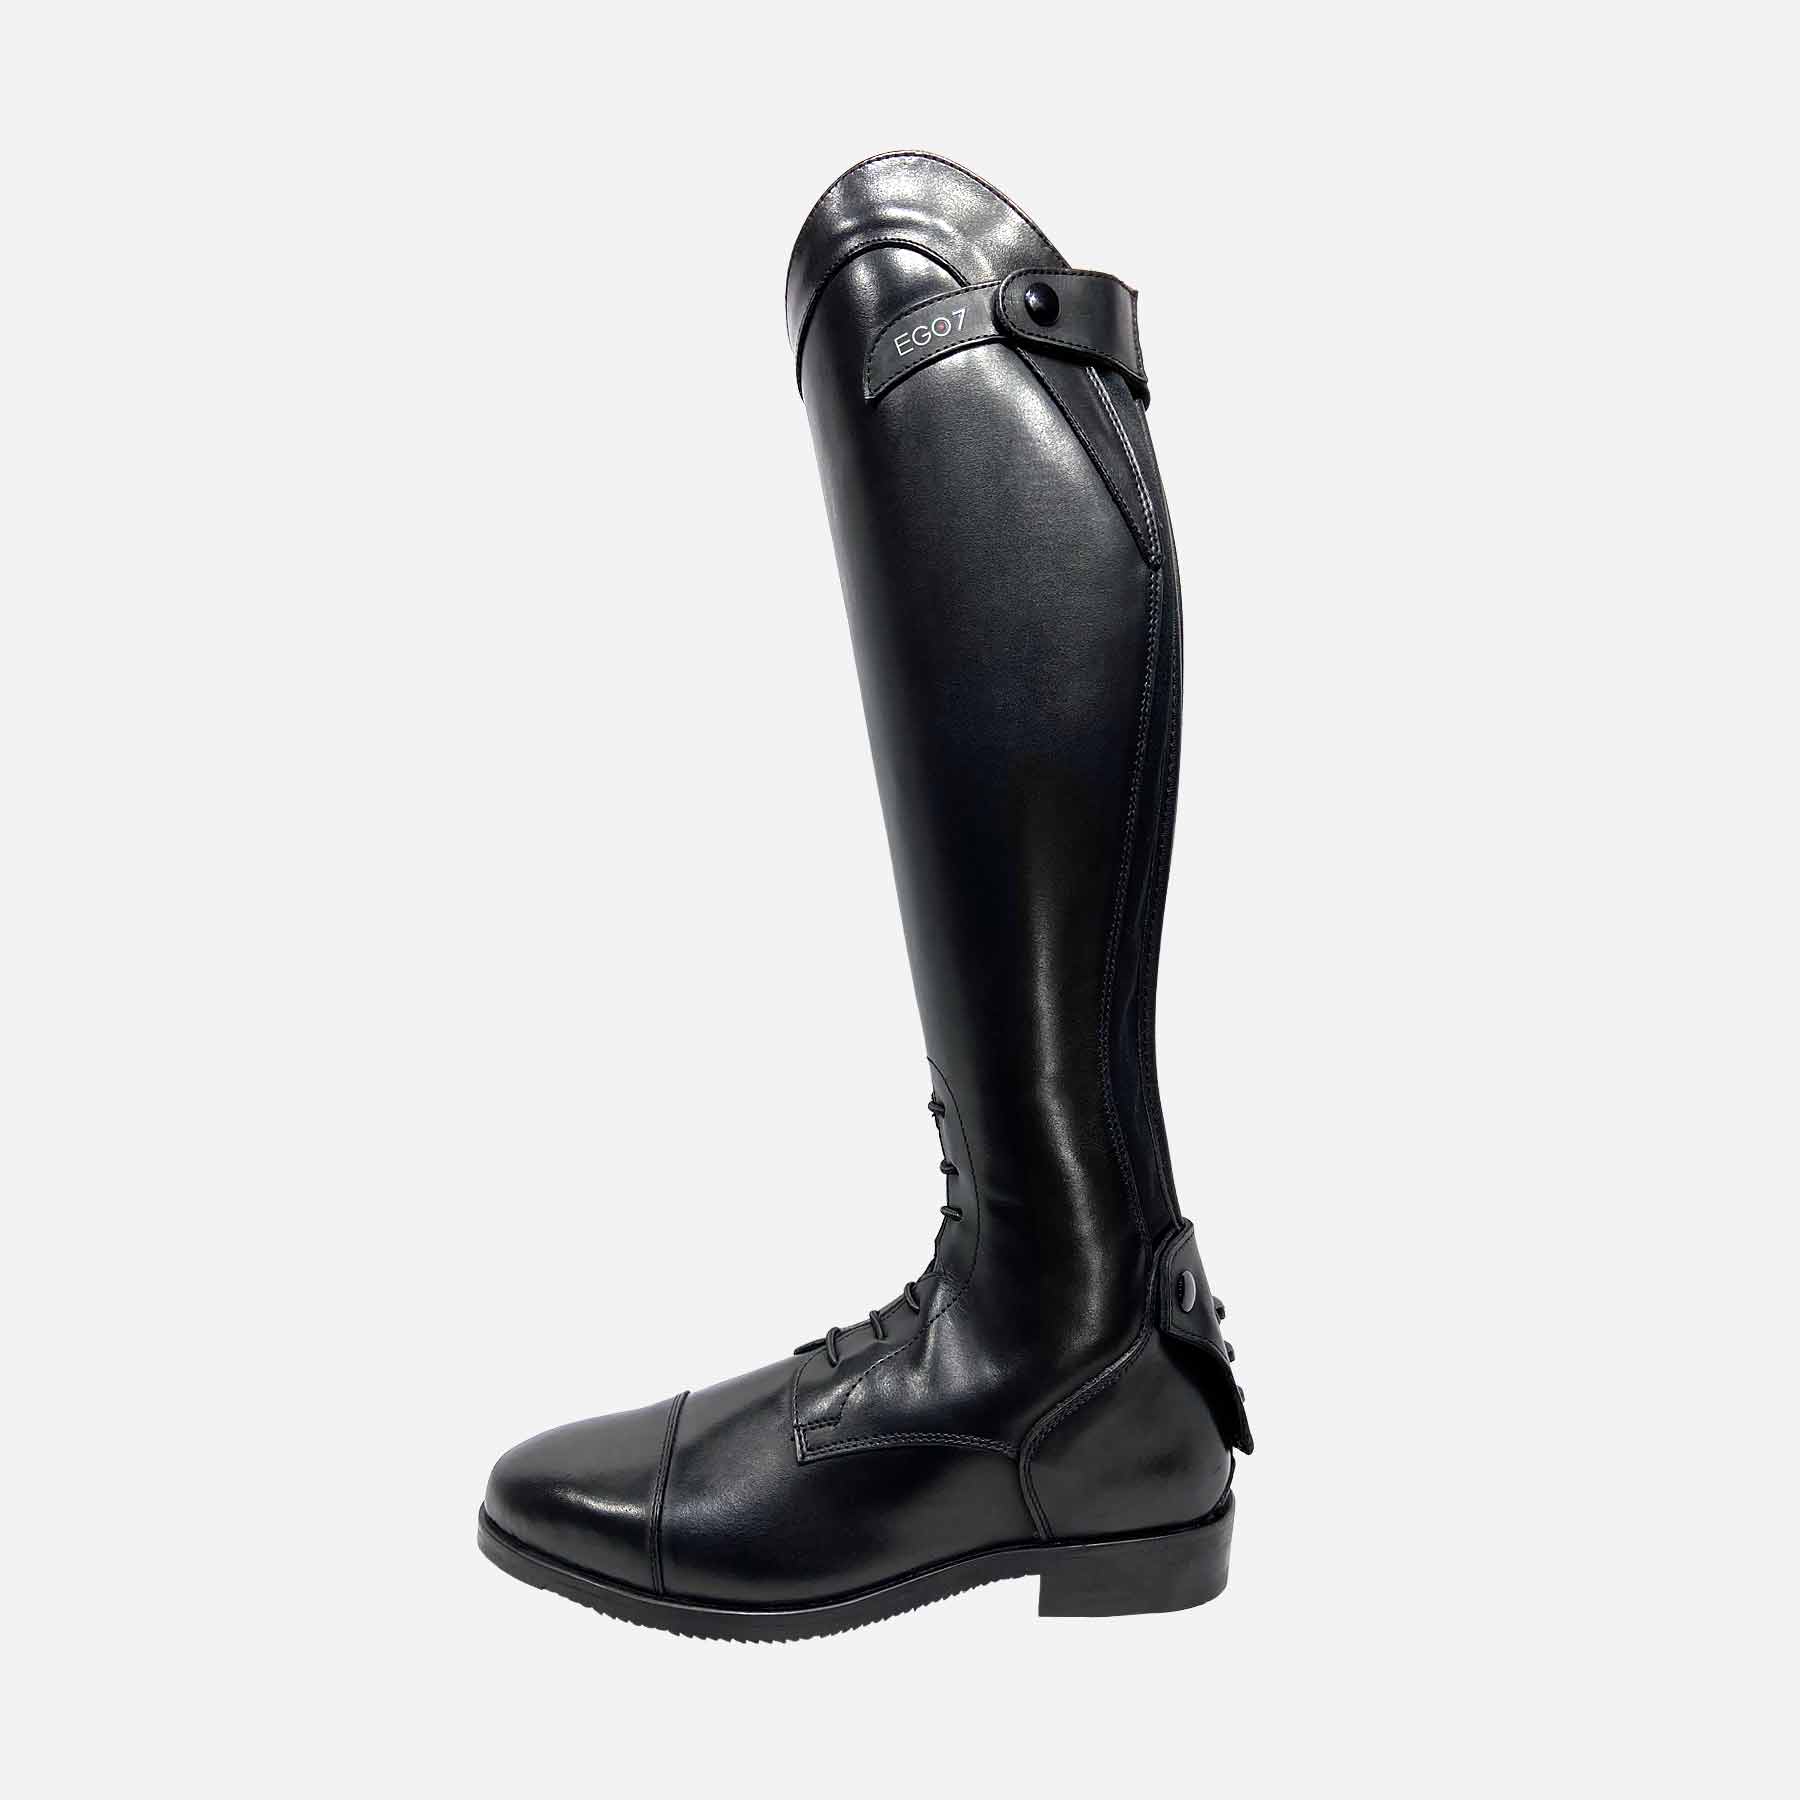 What's the difference between horse riding boots and normal boots?